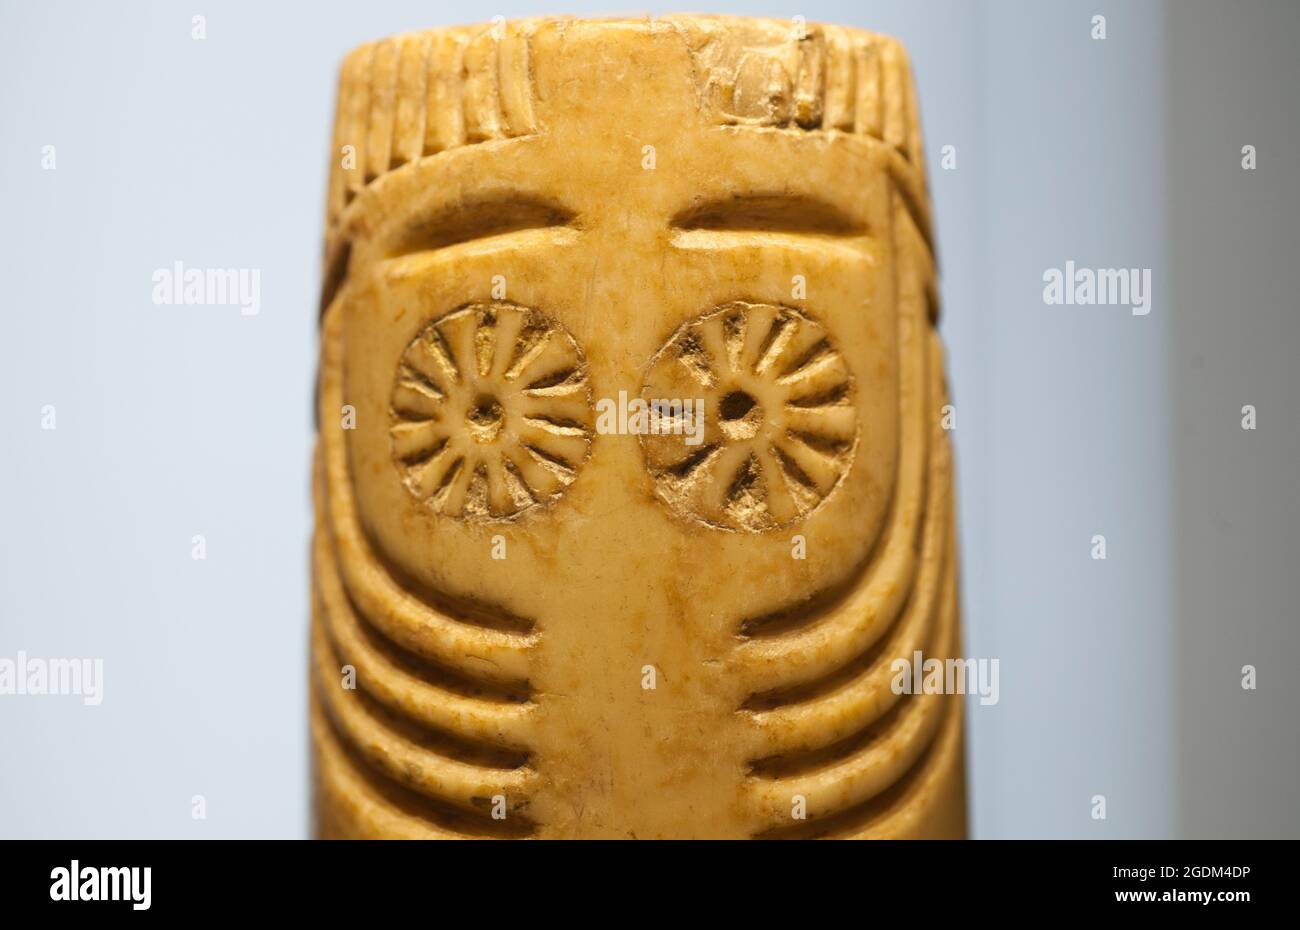 Madrid, Spain - Marh 6th 2021: Extremaduran eyed idol. Prehistorical sculpture from Chalcolithic period. National Archeological  Museum of Madrid Stock Photo